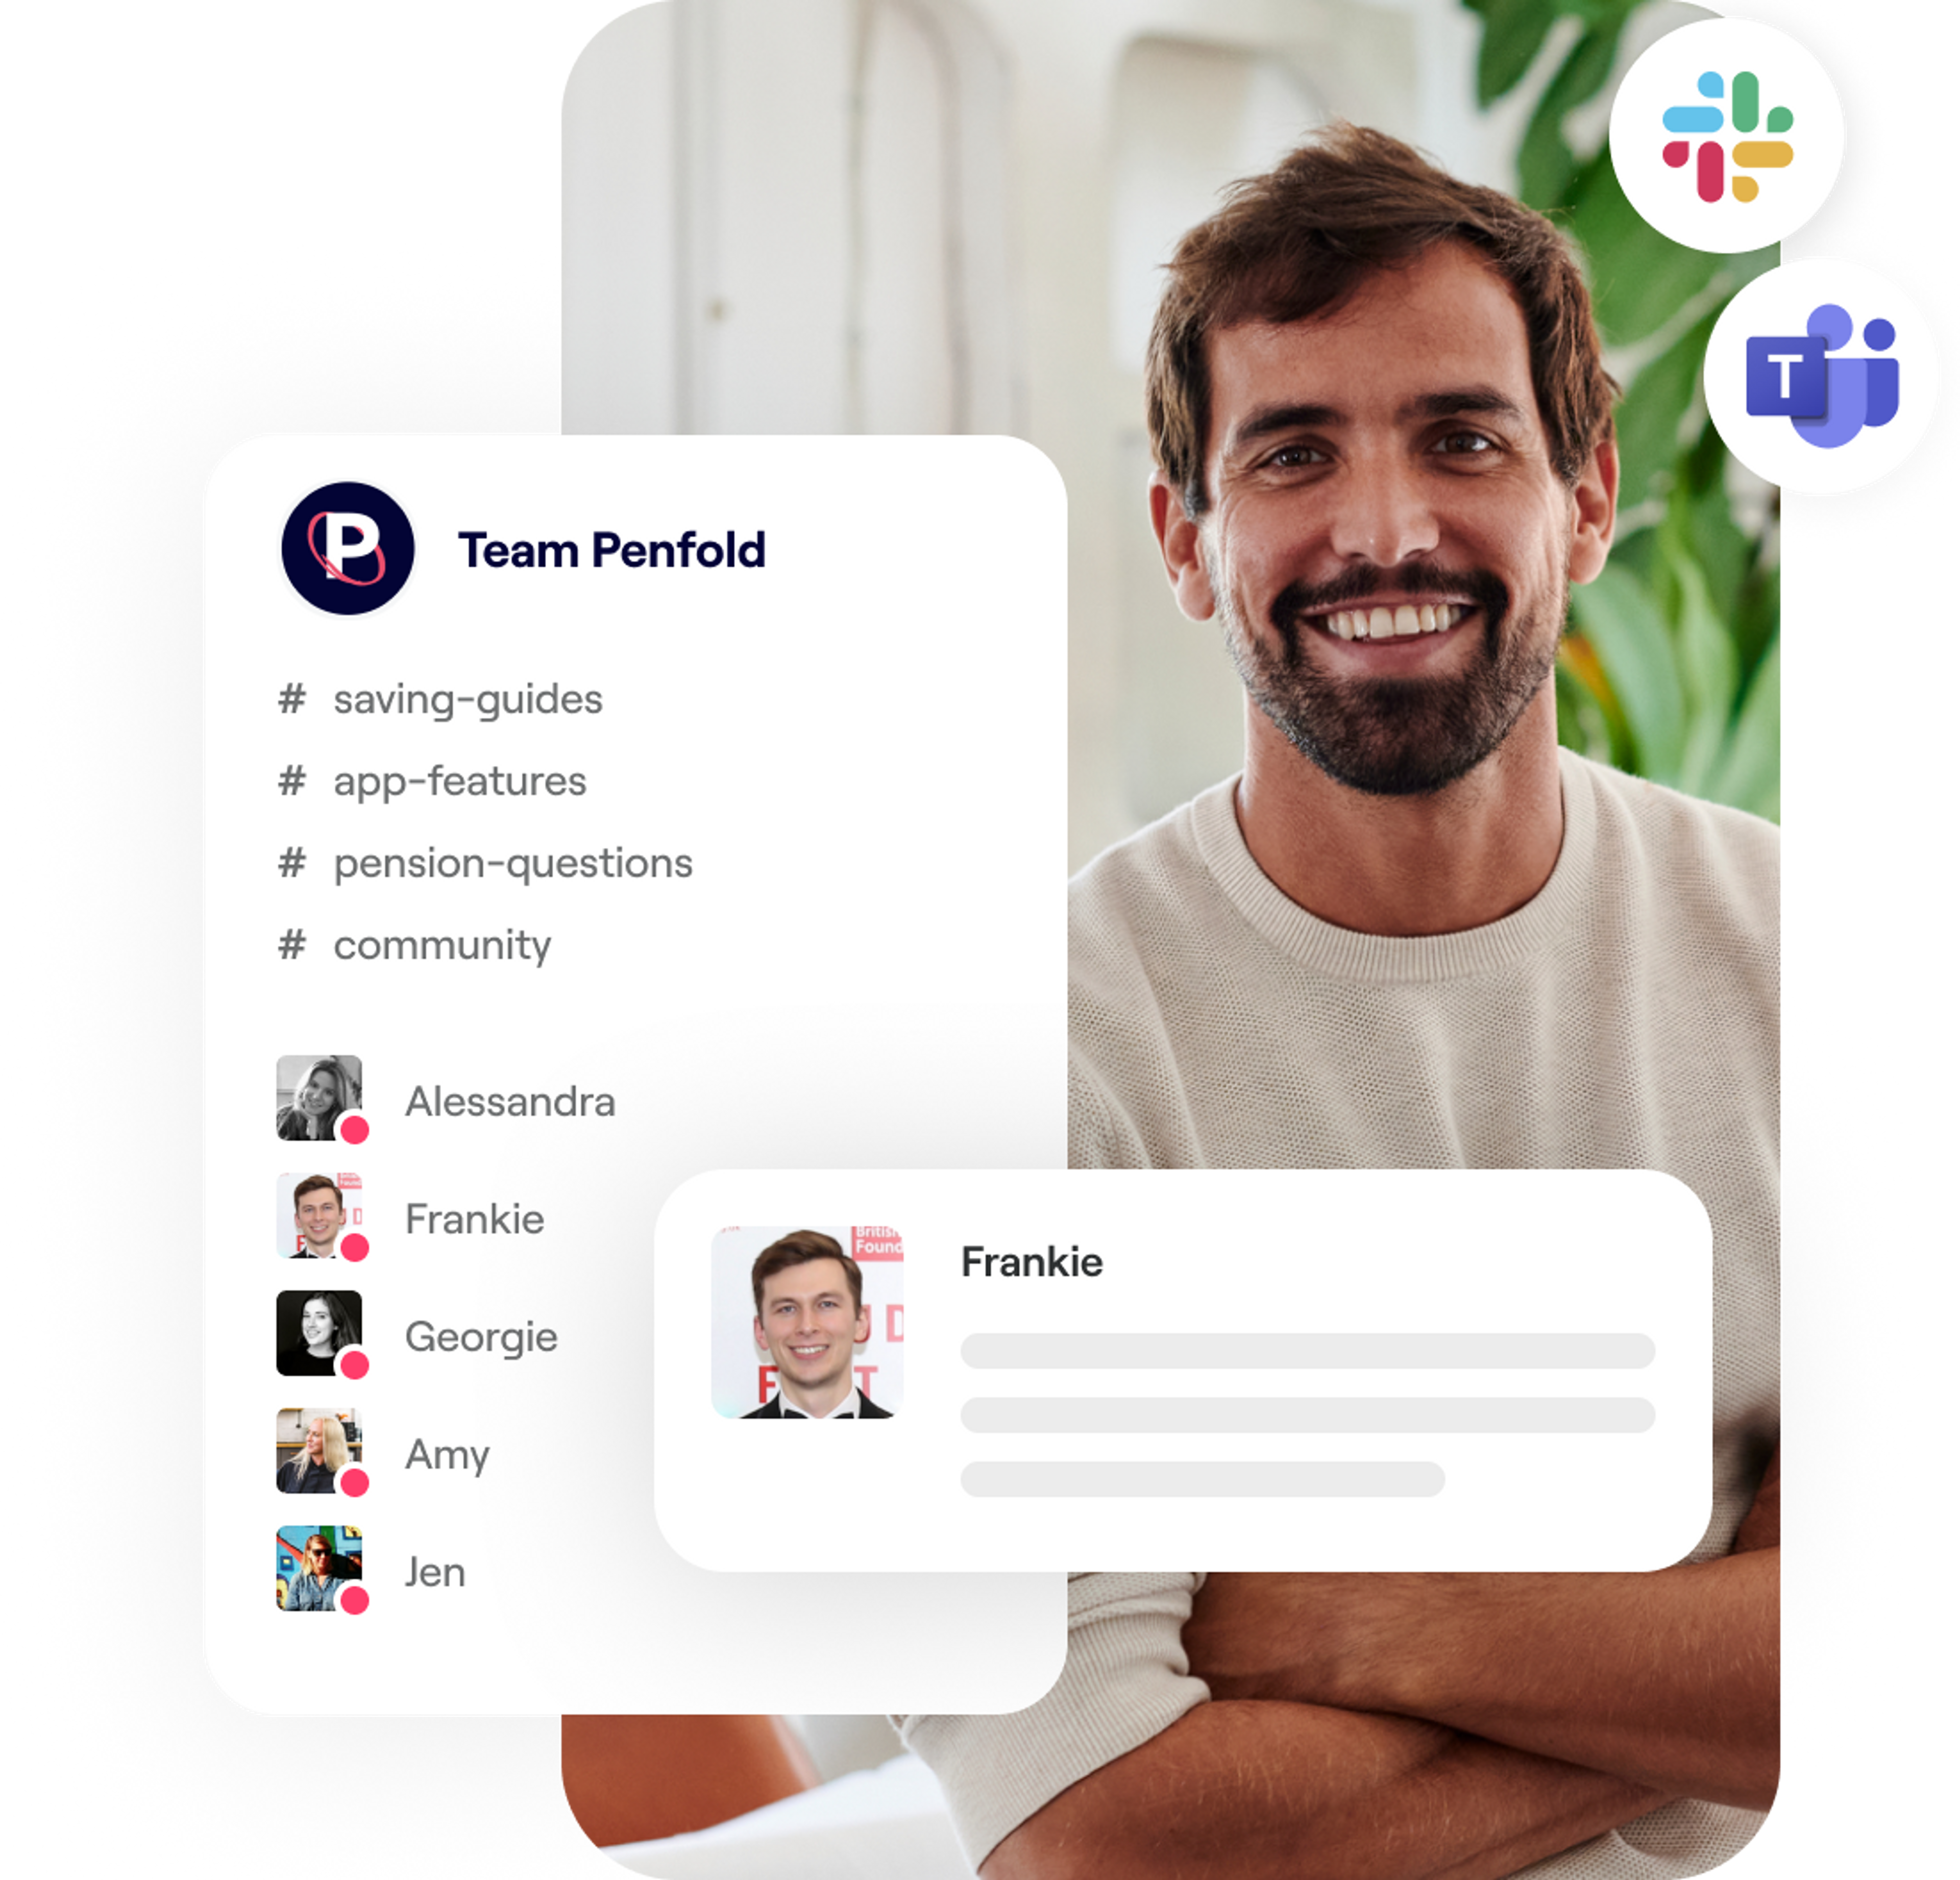 A photo of a man smiling and excerpts of the Penfold pension app showing integrations with work chats